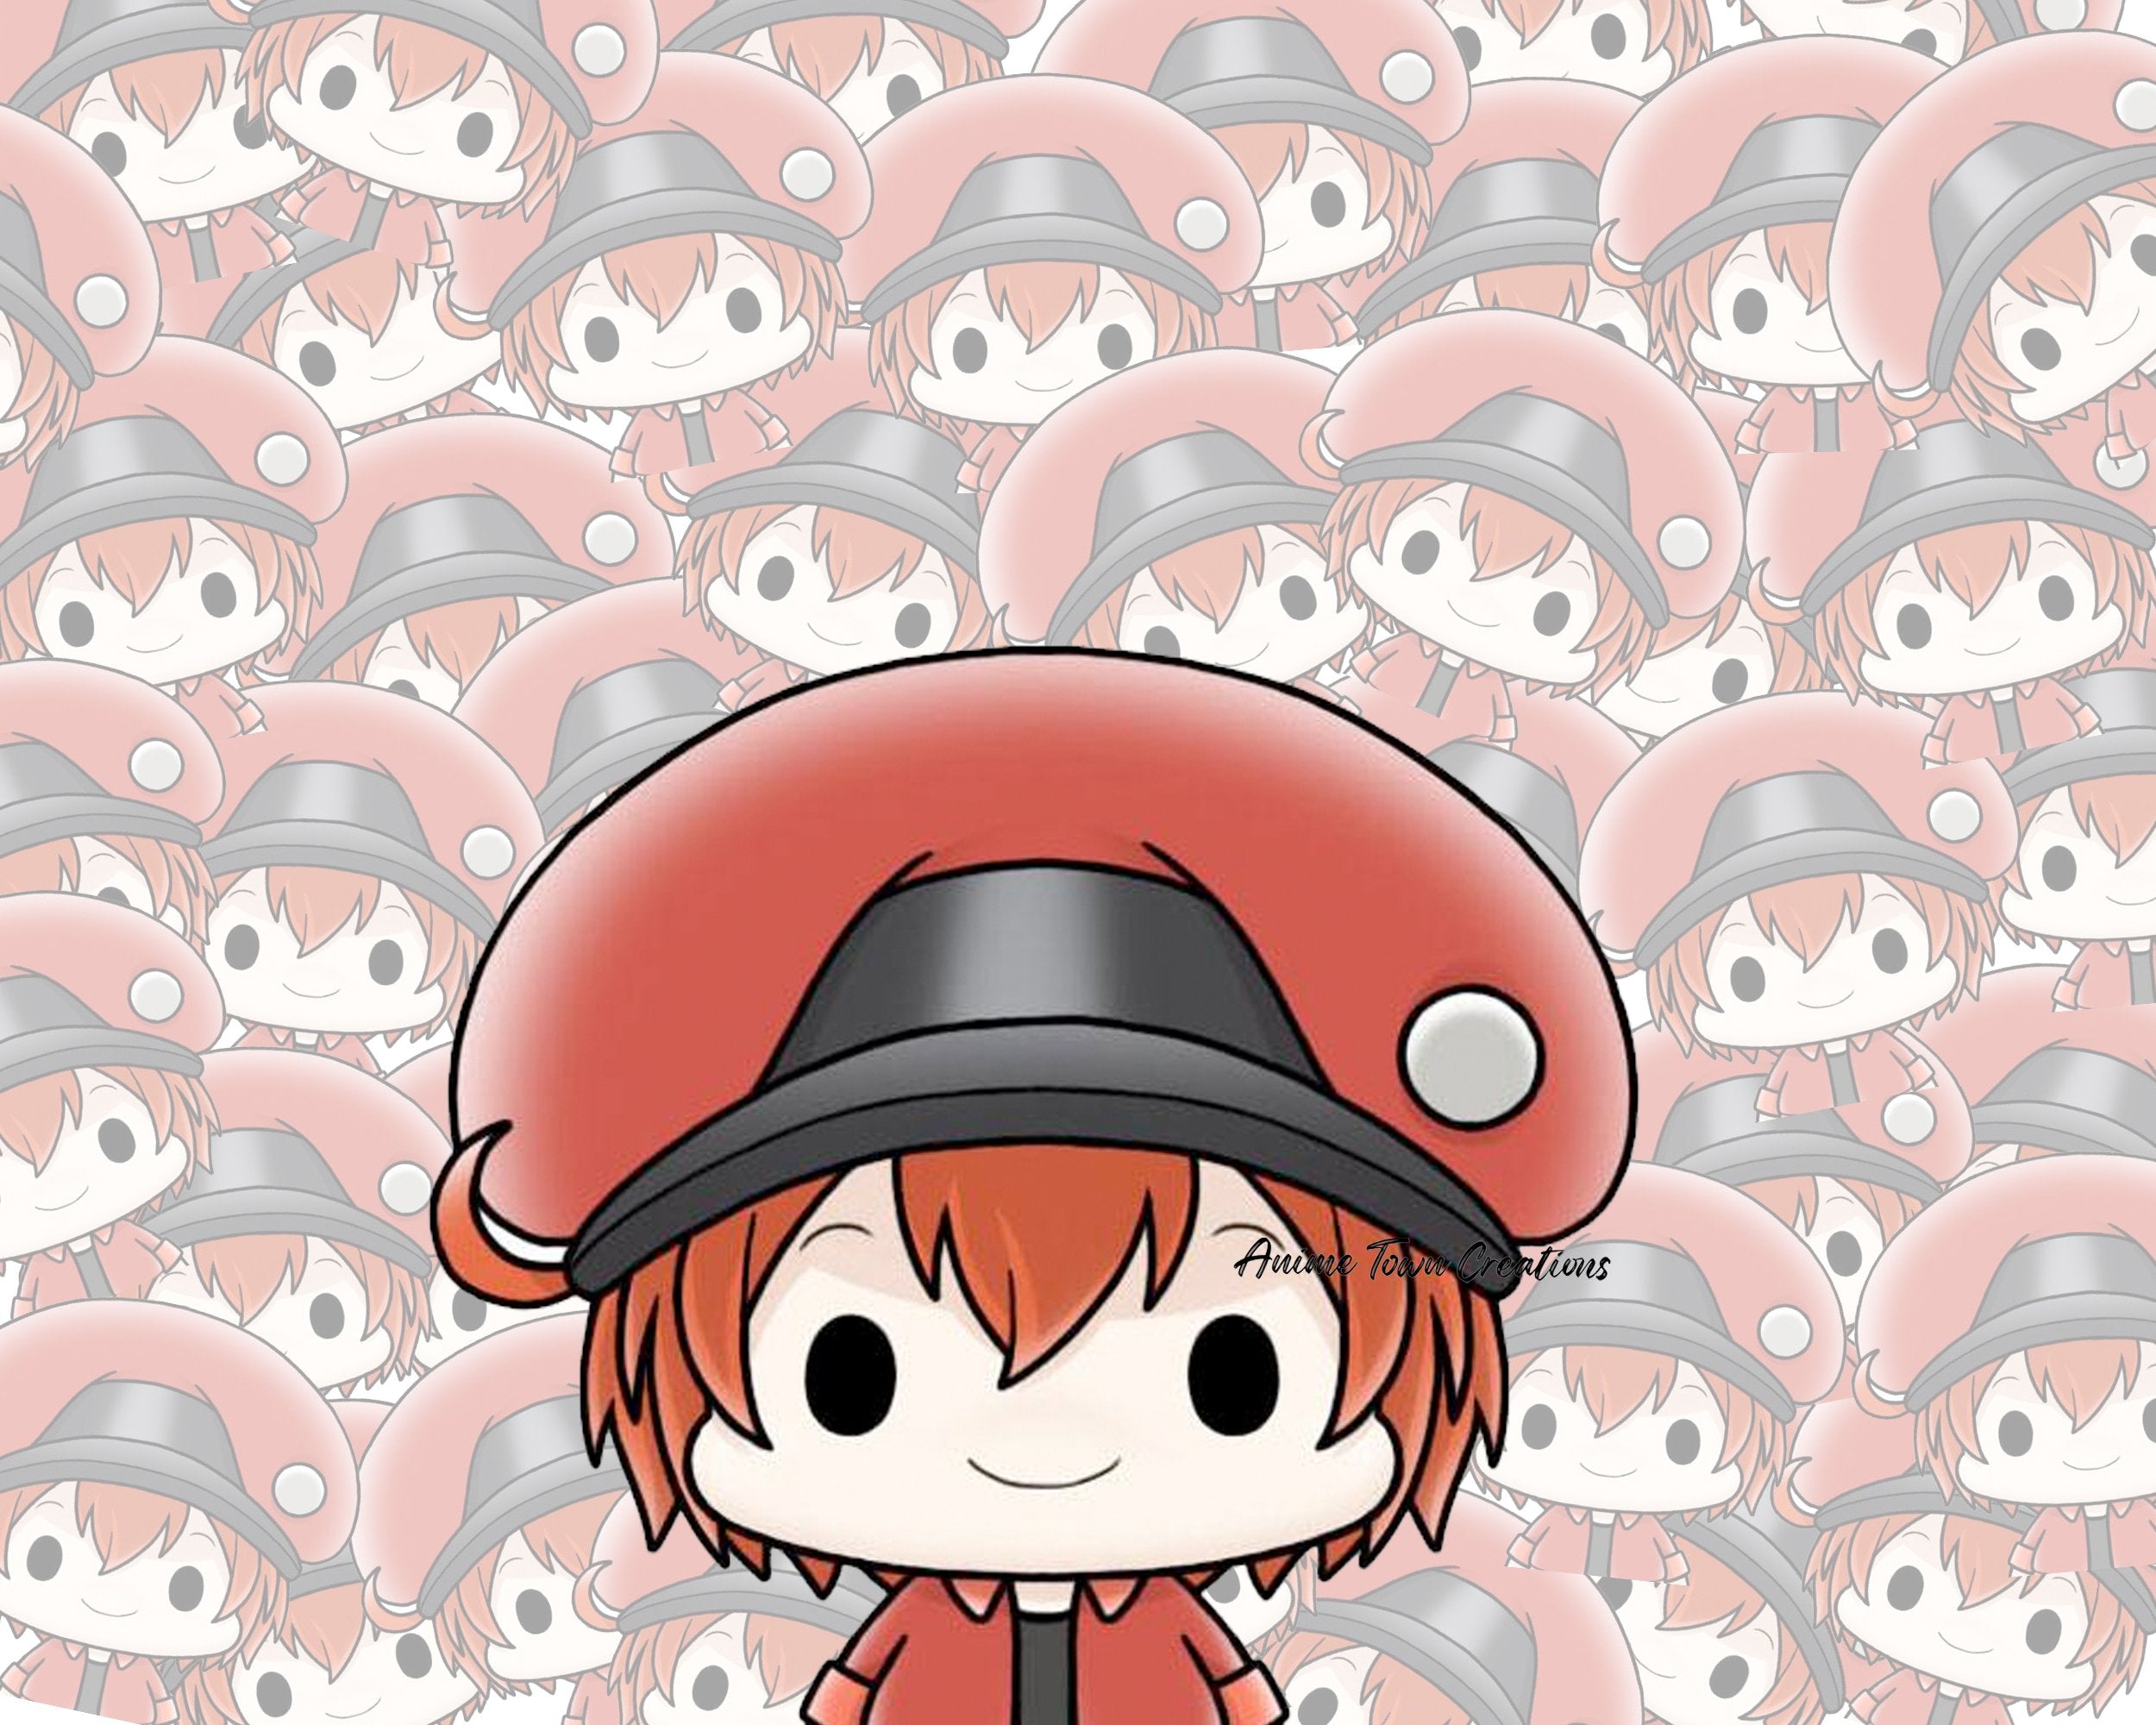 Cells at work | Red blood cell | | Personajes de anime, Dibujos, Anime